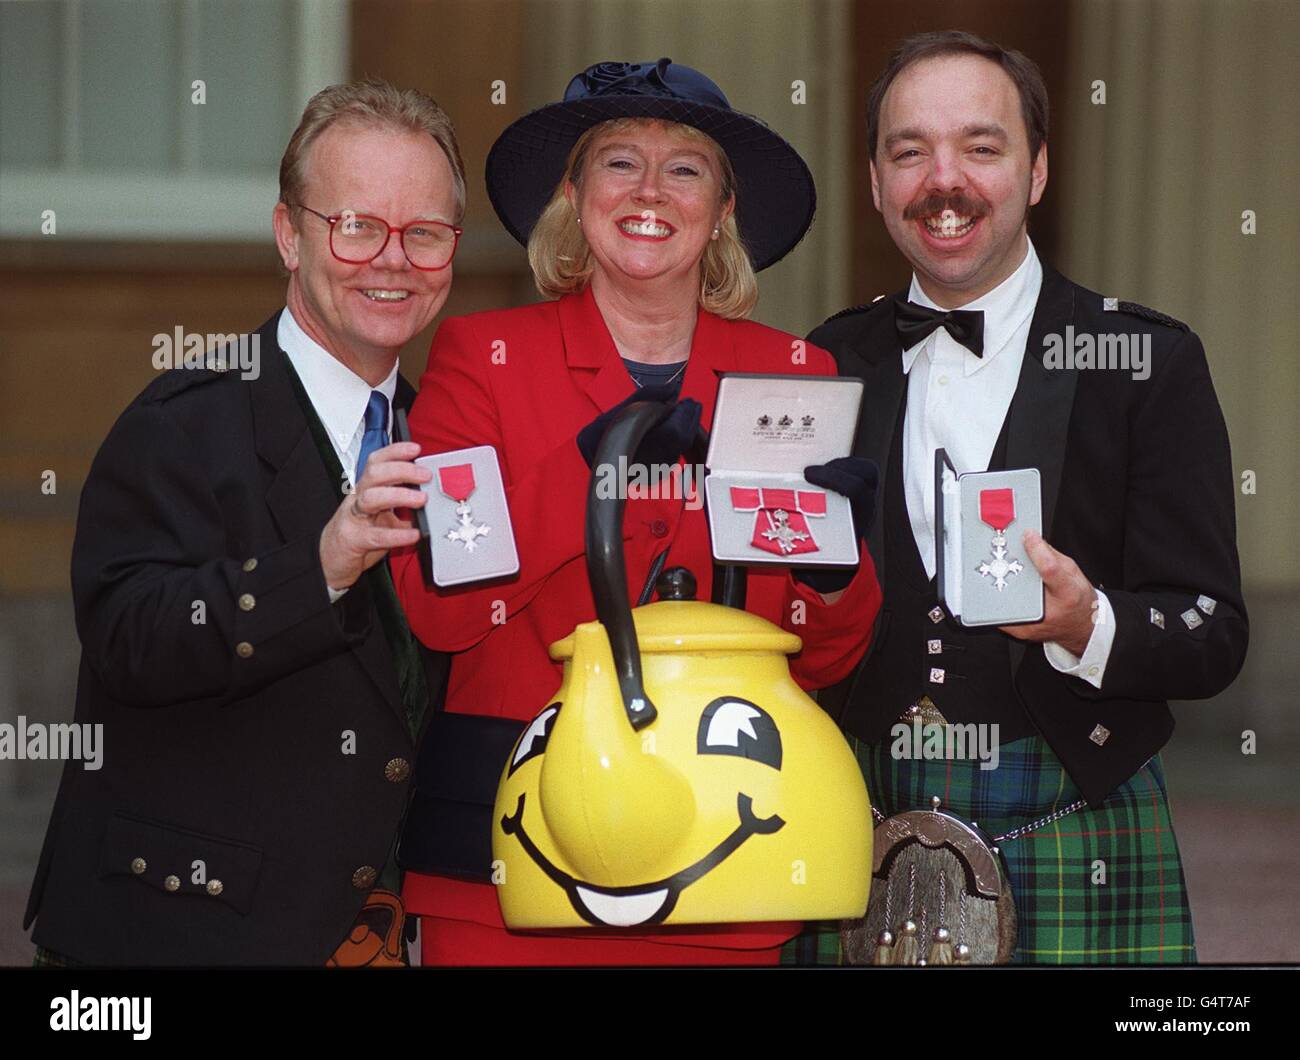 L-R: Artie Trezise, Cilla fisher and Gary Coupland, the three original members of The Singing Kettle, a Scottish children's entertainment troupe, who were presented with MBEs for services to Children's Entertainment at Buckingham Palace, London. Stock Photo